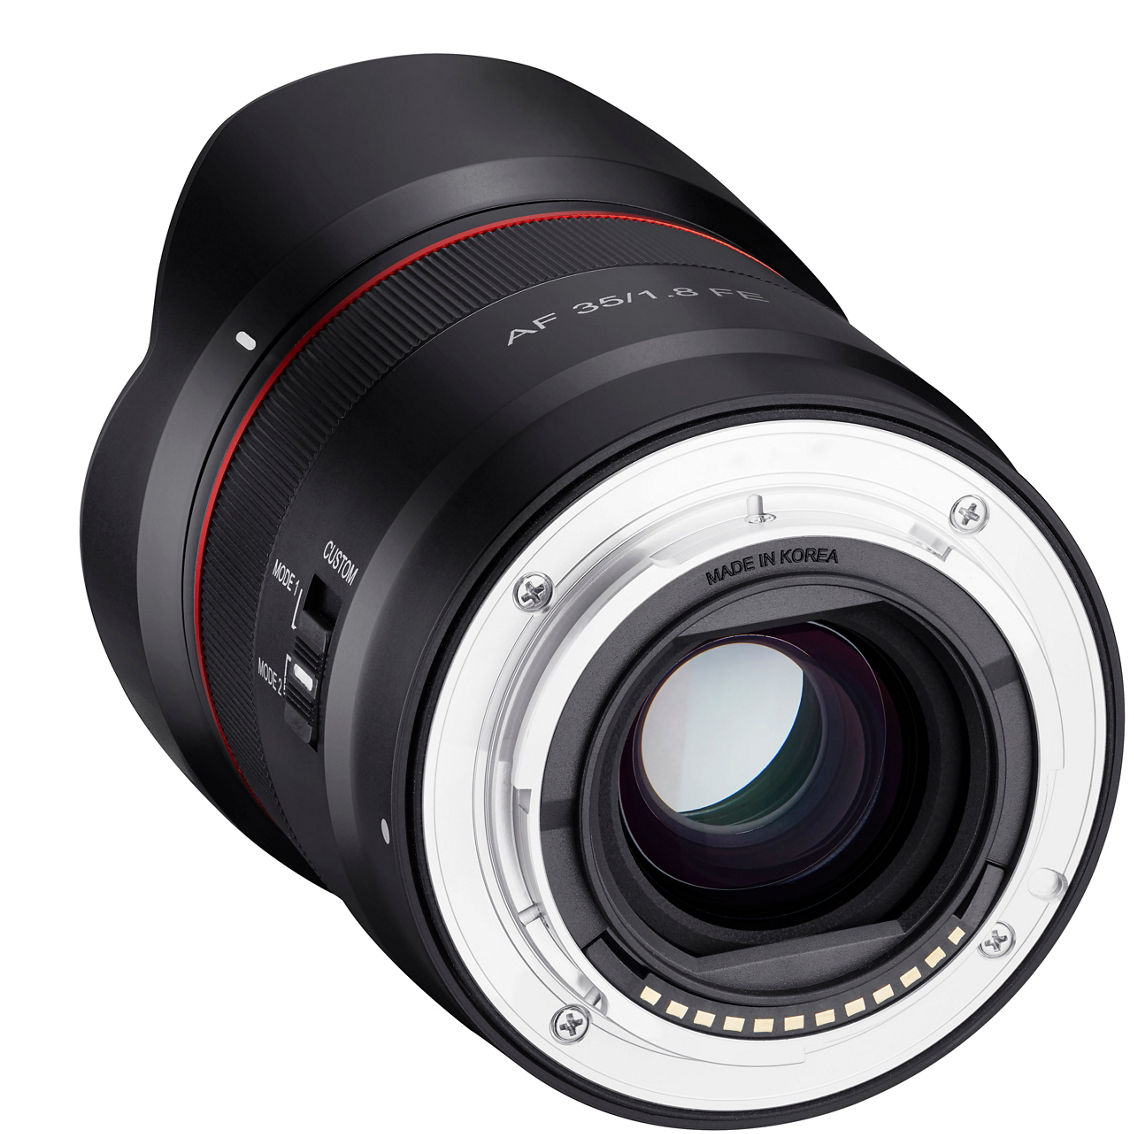 Rokinon 35mm F1.8 AF Compact Full Frame Wide Angle Lens for Sony E - Image 5 of 5